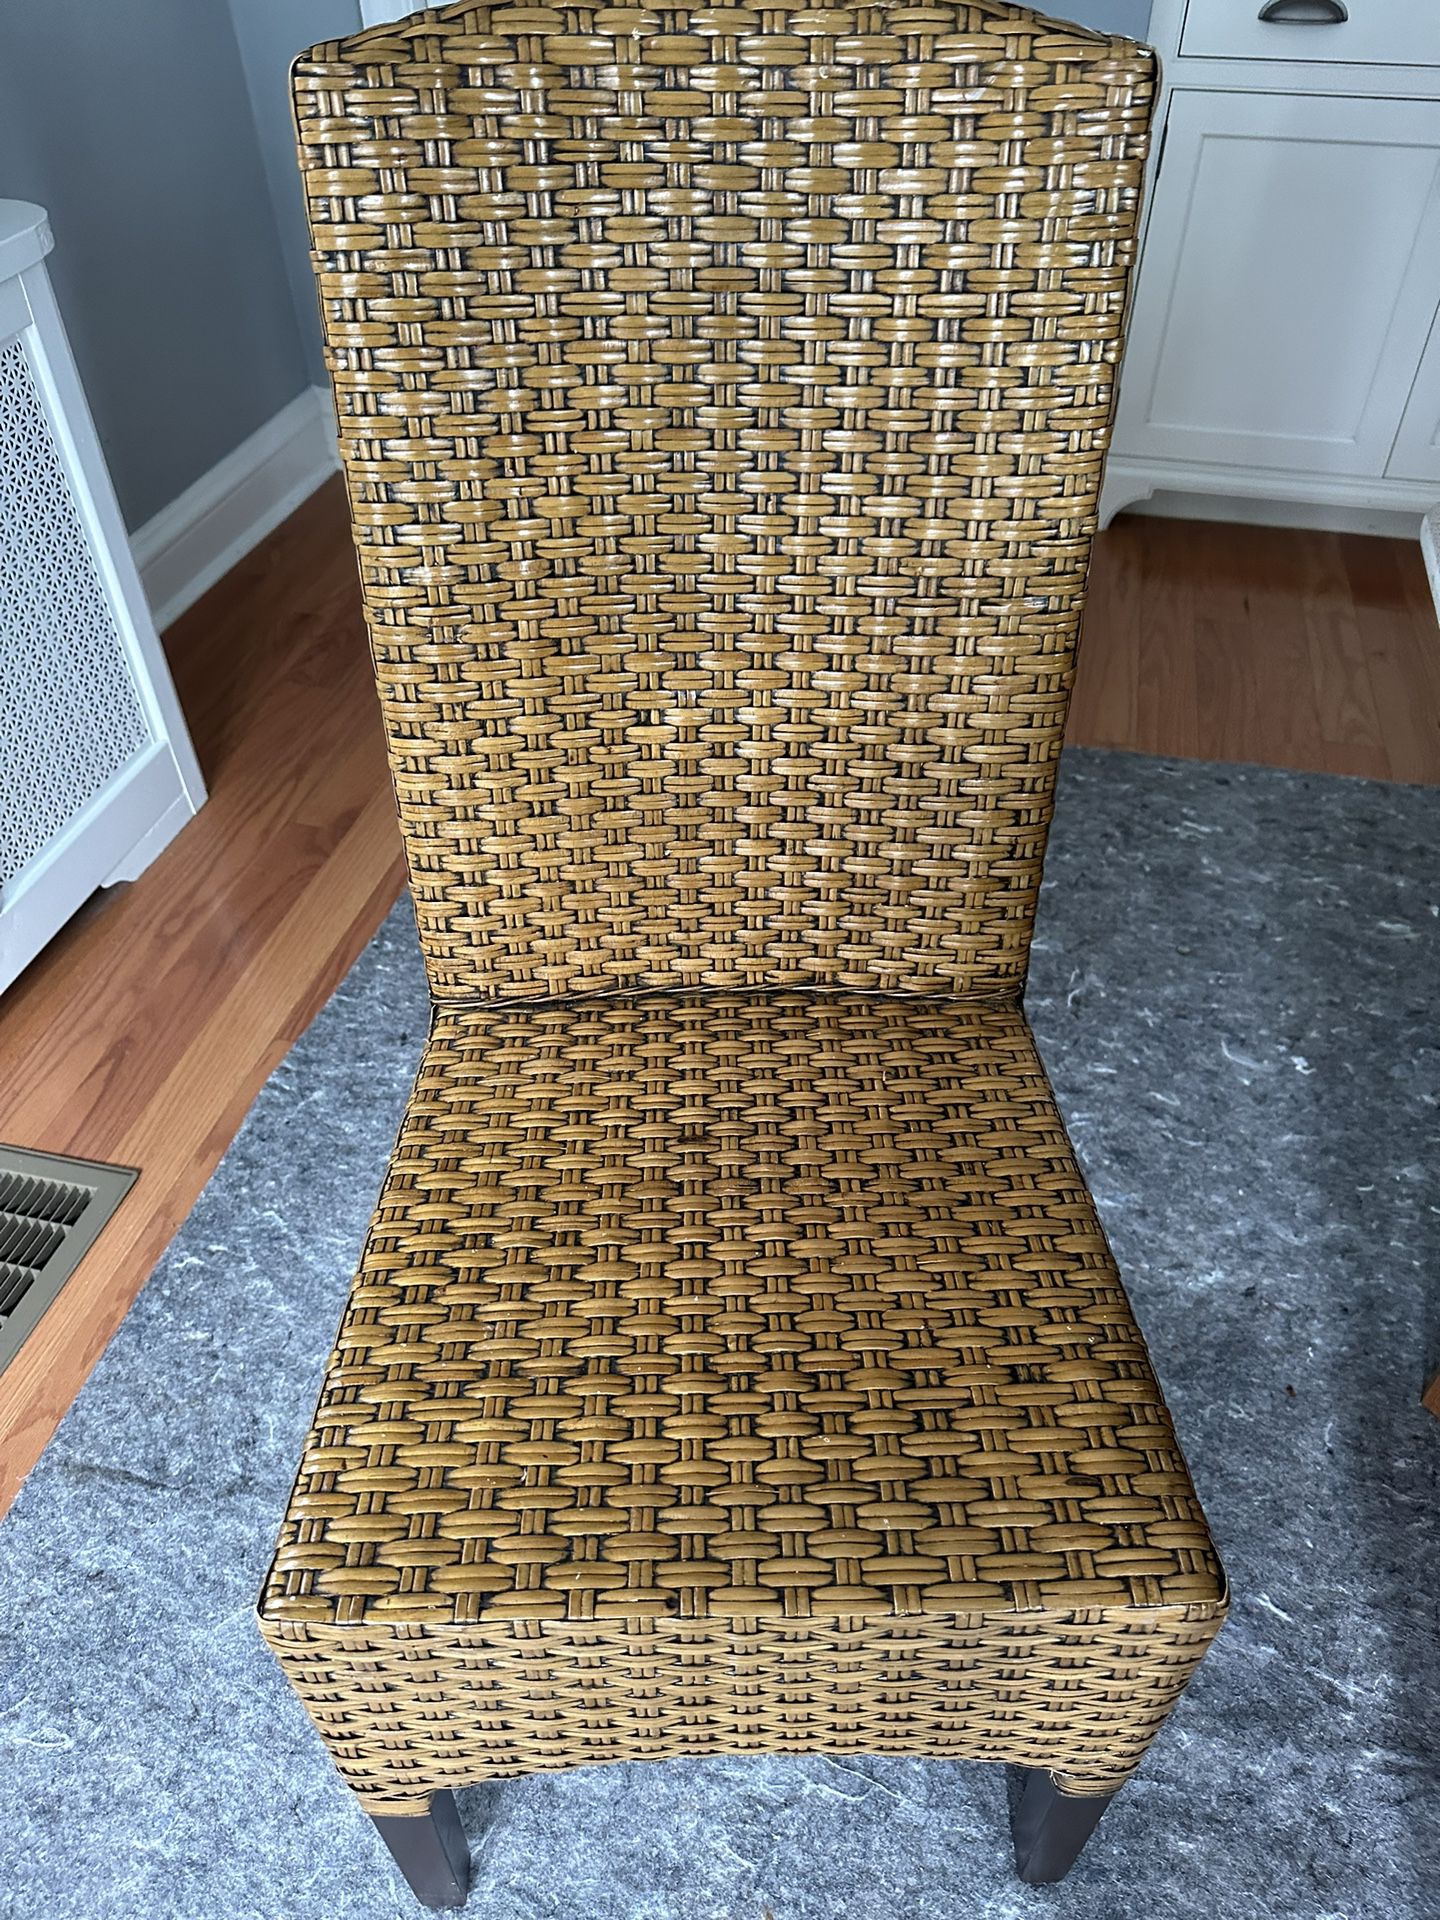 Wicker Chairs 4 